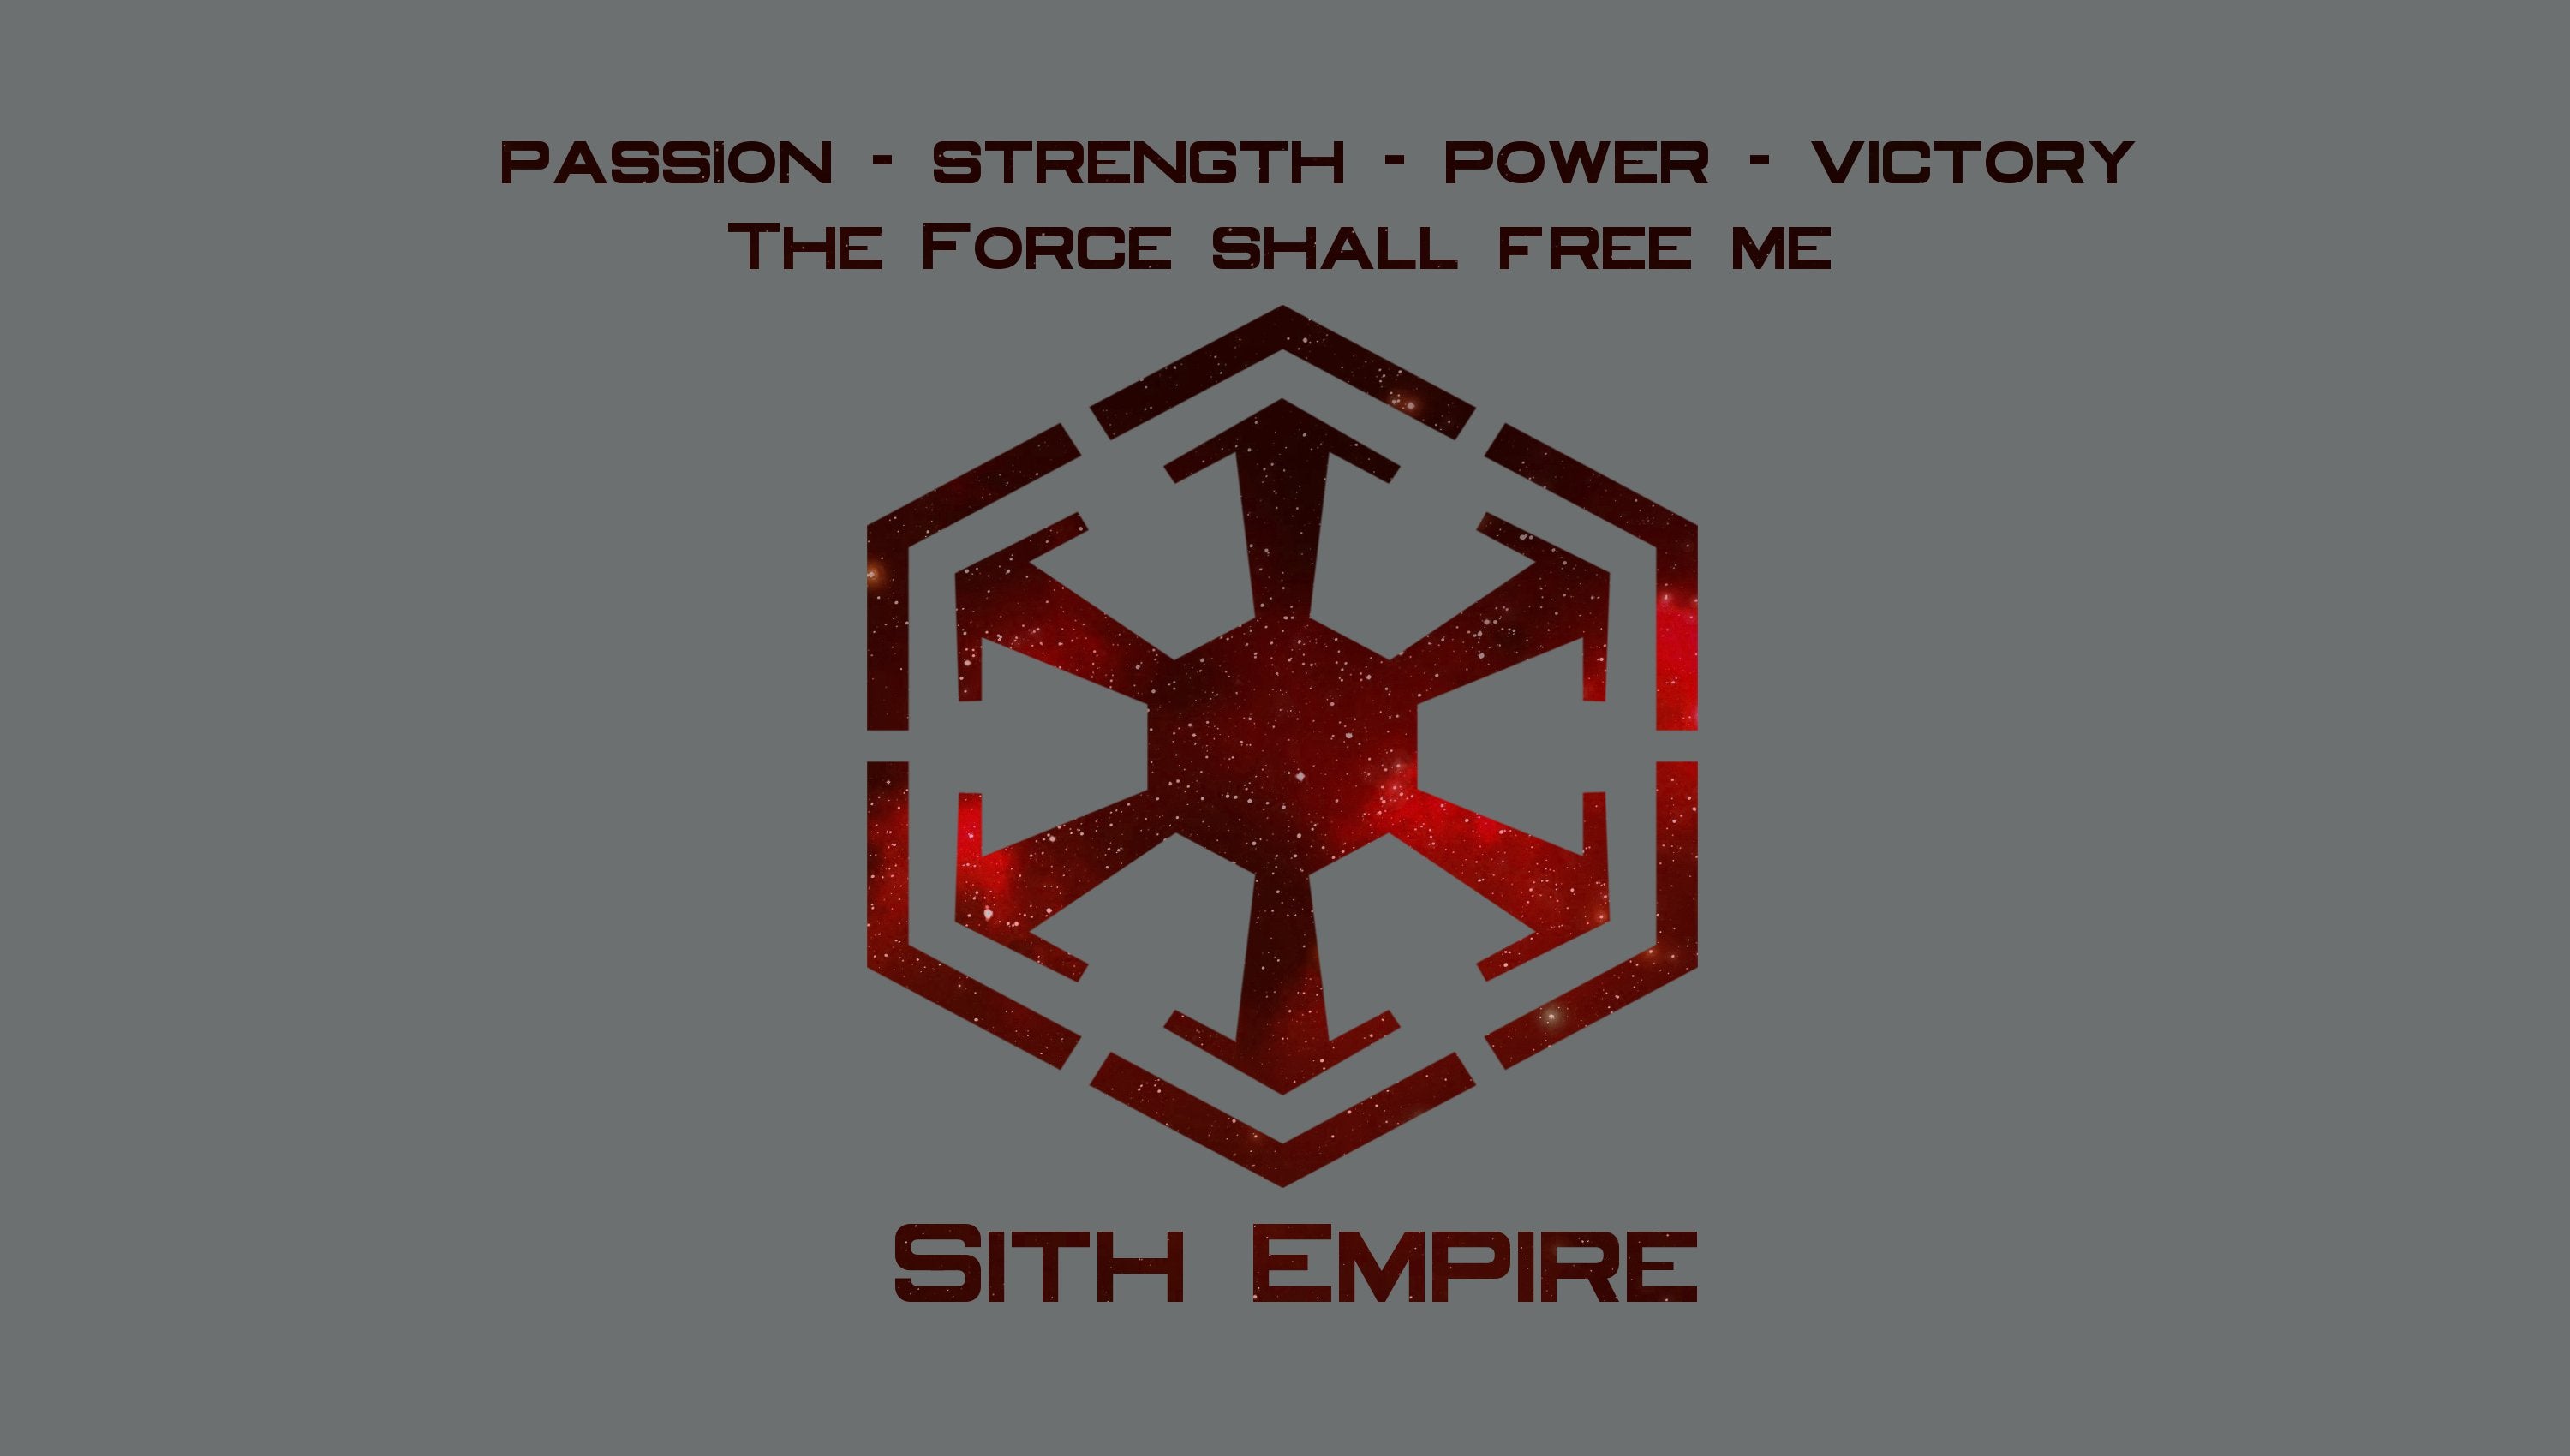 check out my SITH code WallPapers! :D